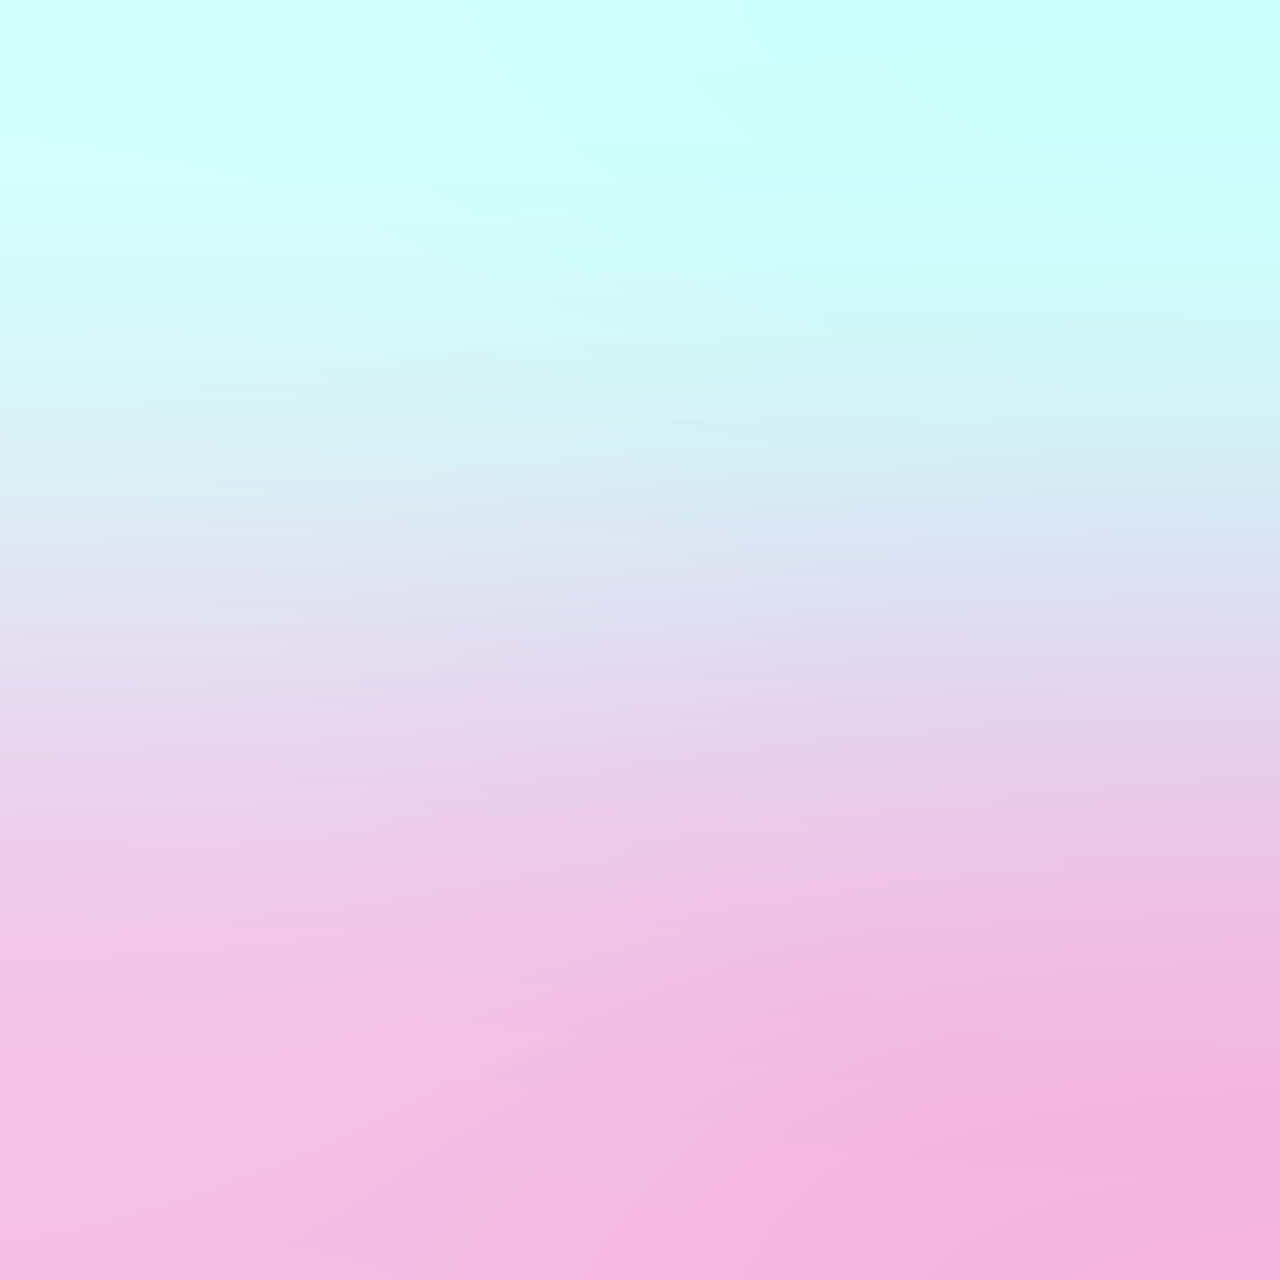 Download A Pink And Blue Gradient Background | Wallpapers.com